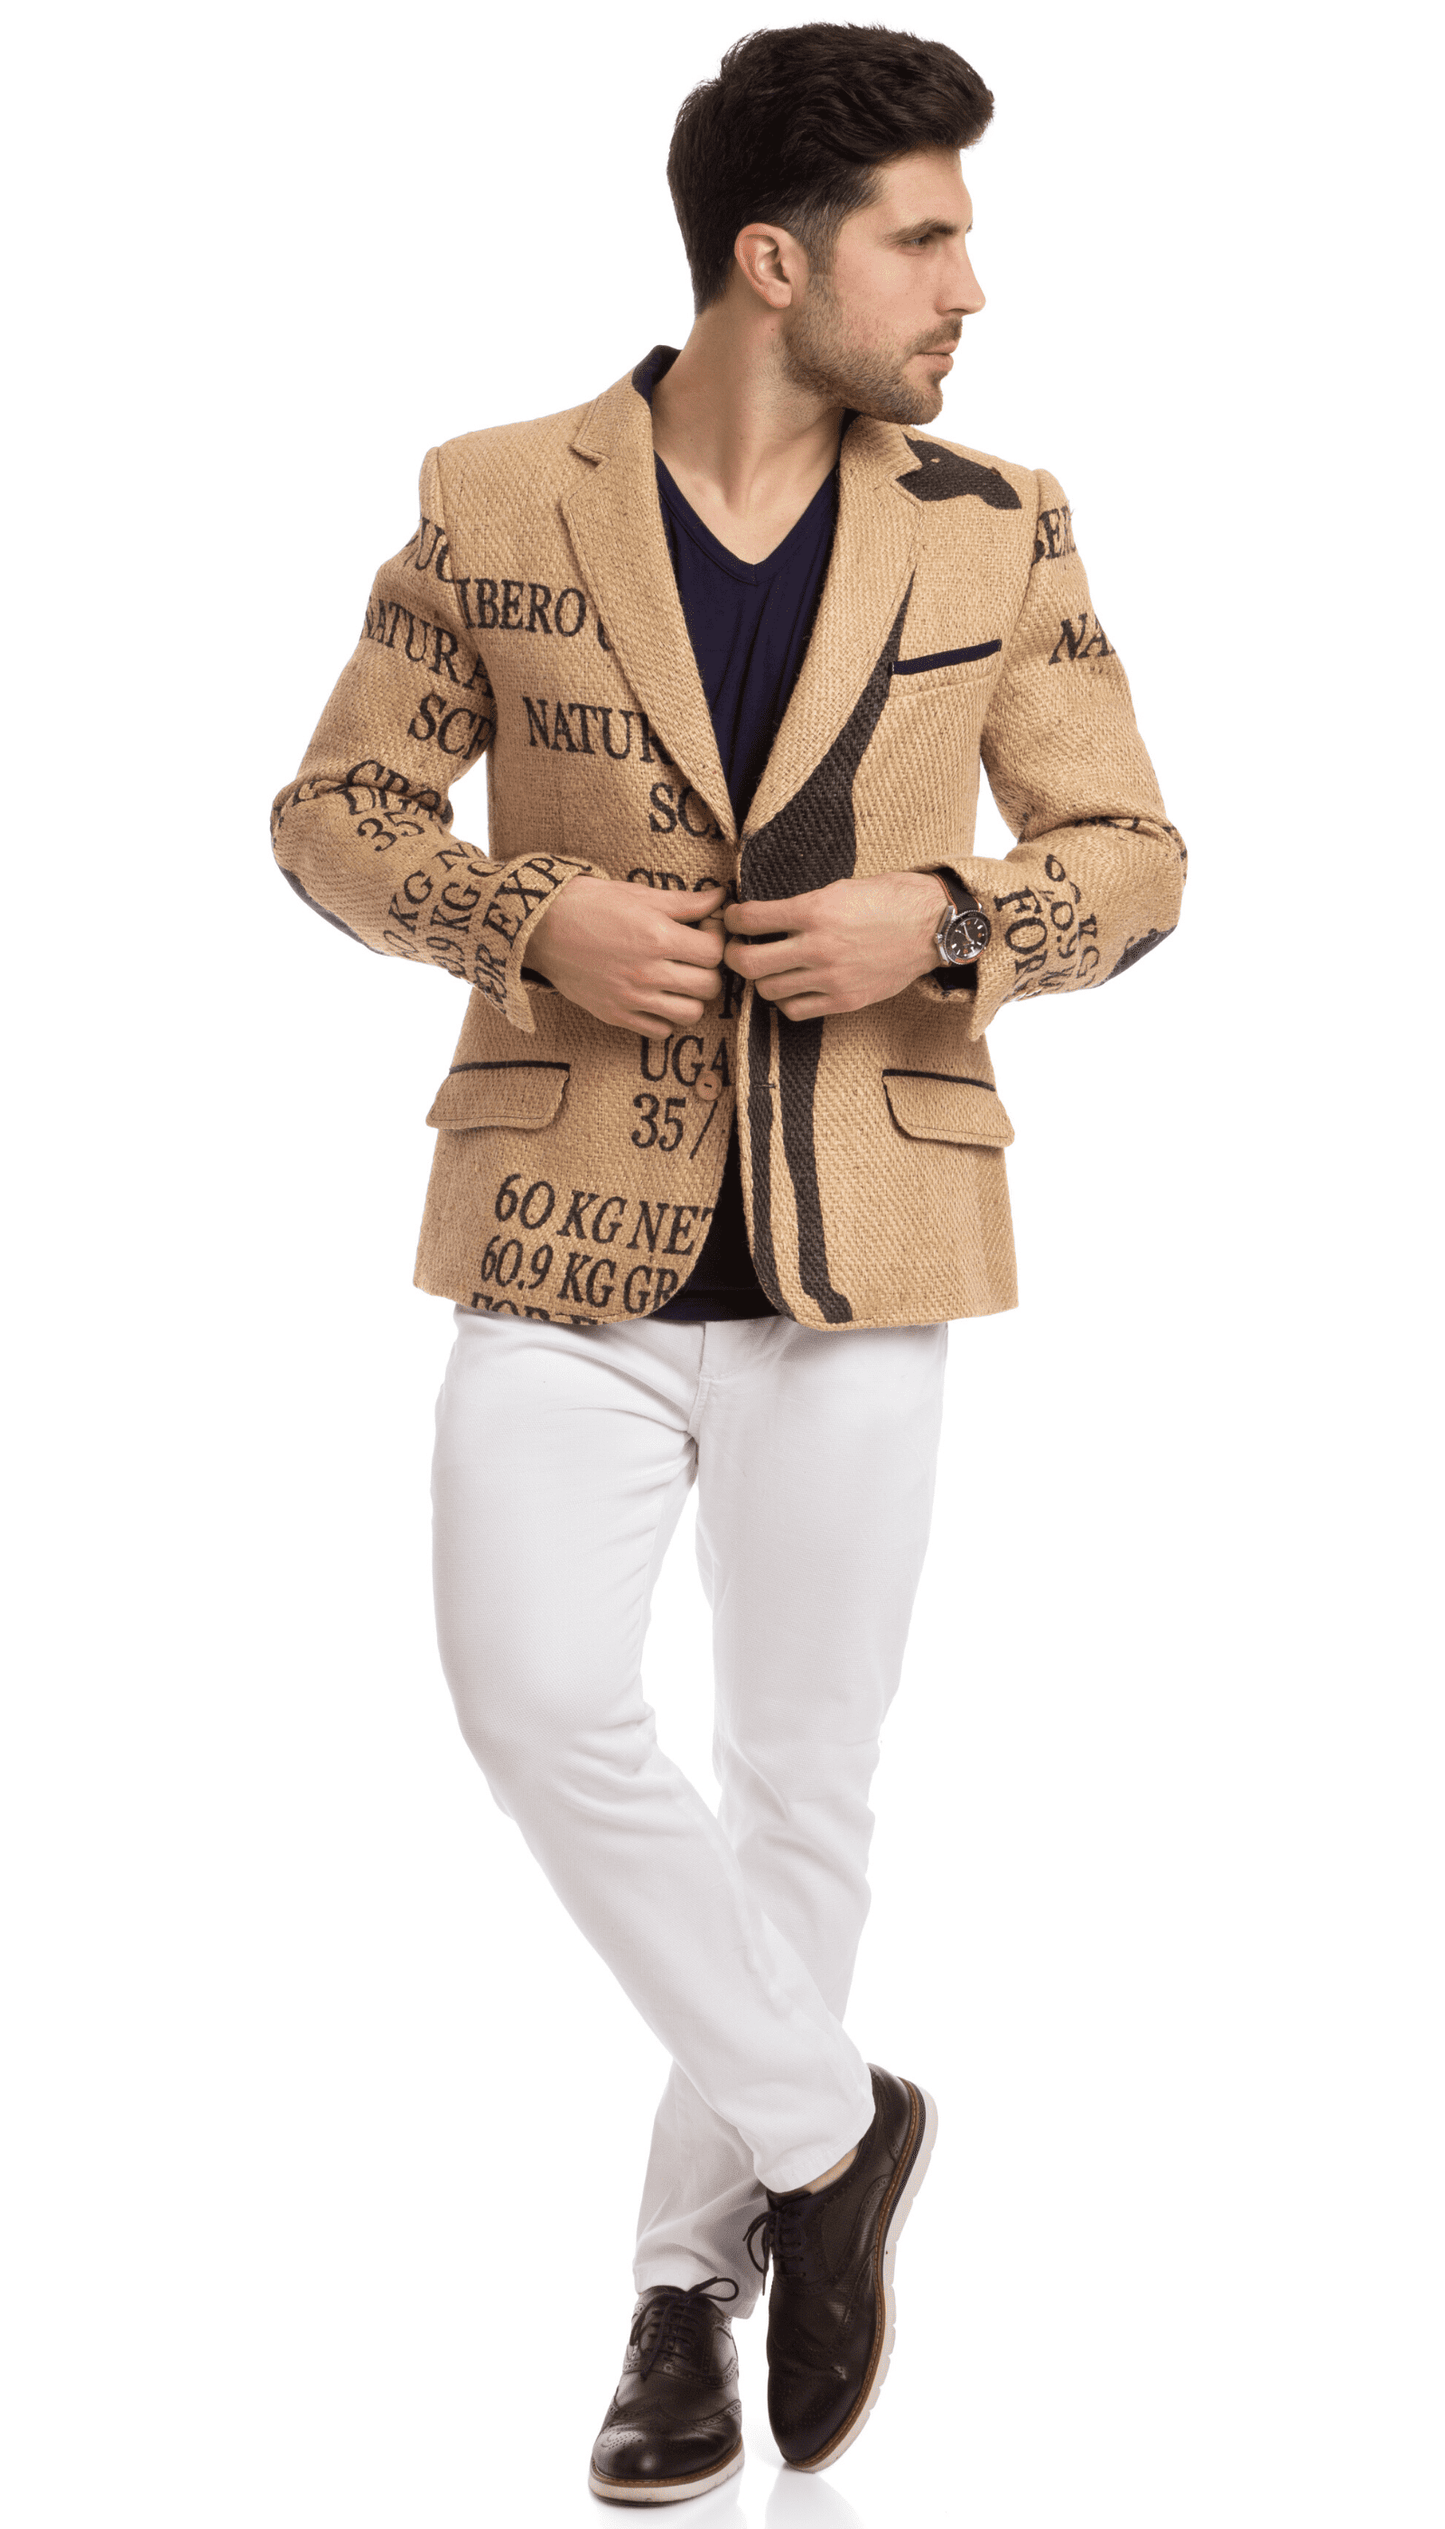 Absolutely stylish and elegnat men`s jacket made of coffee sacks by a German eco-friendly brand THE COFFEE JACKET®